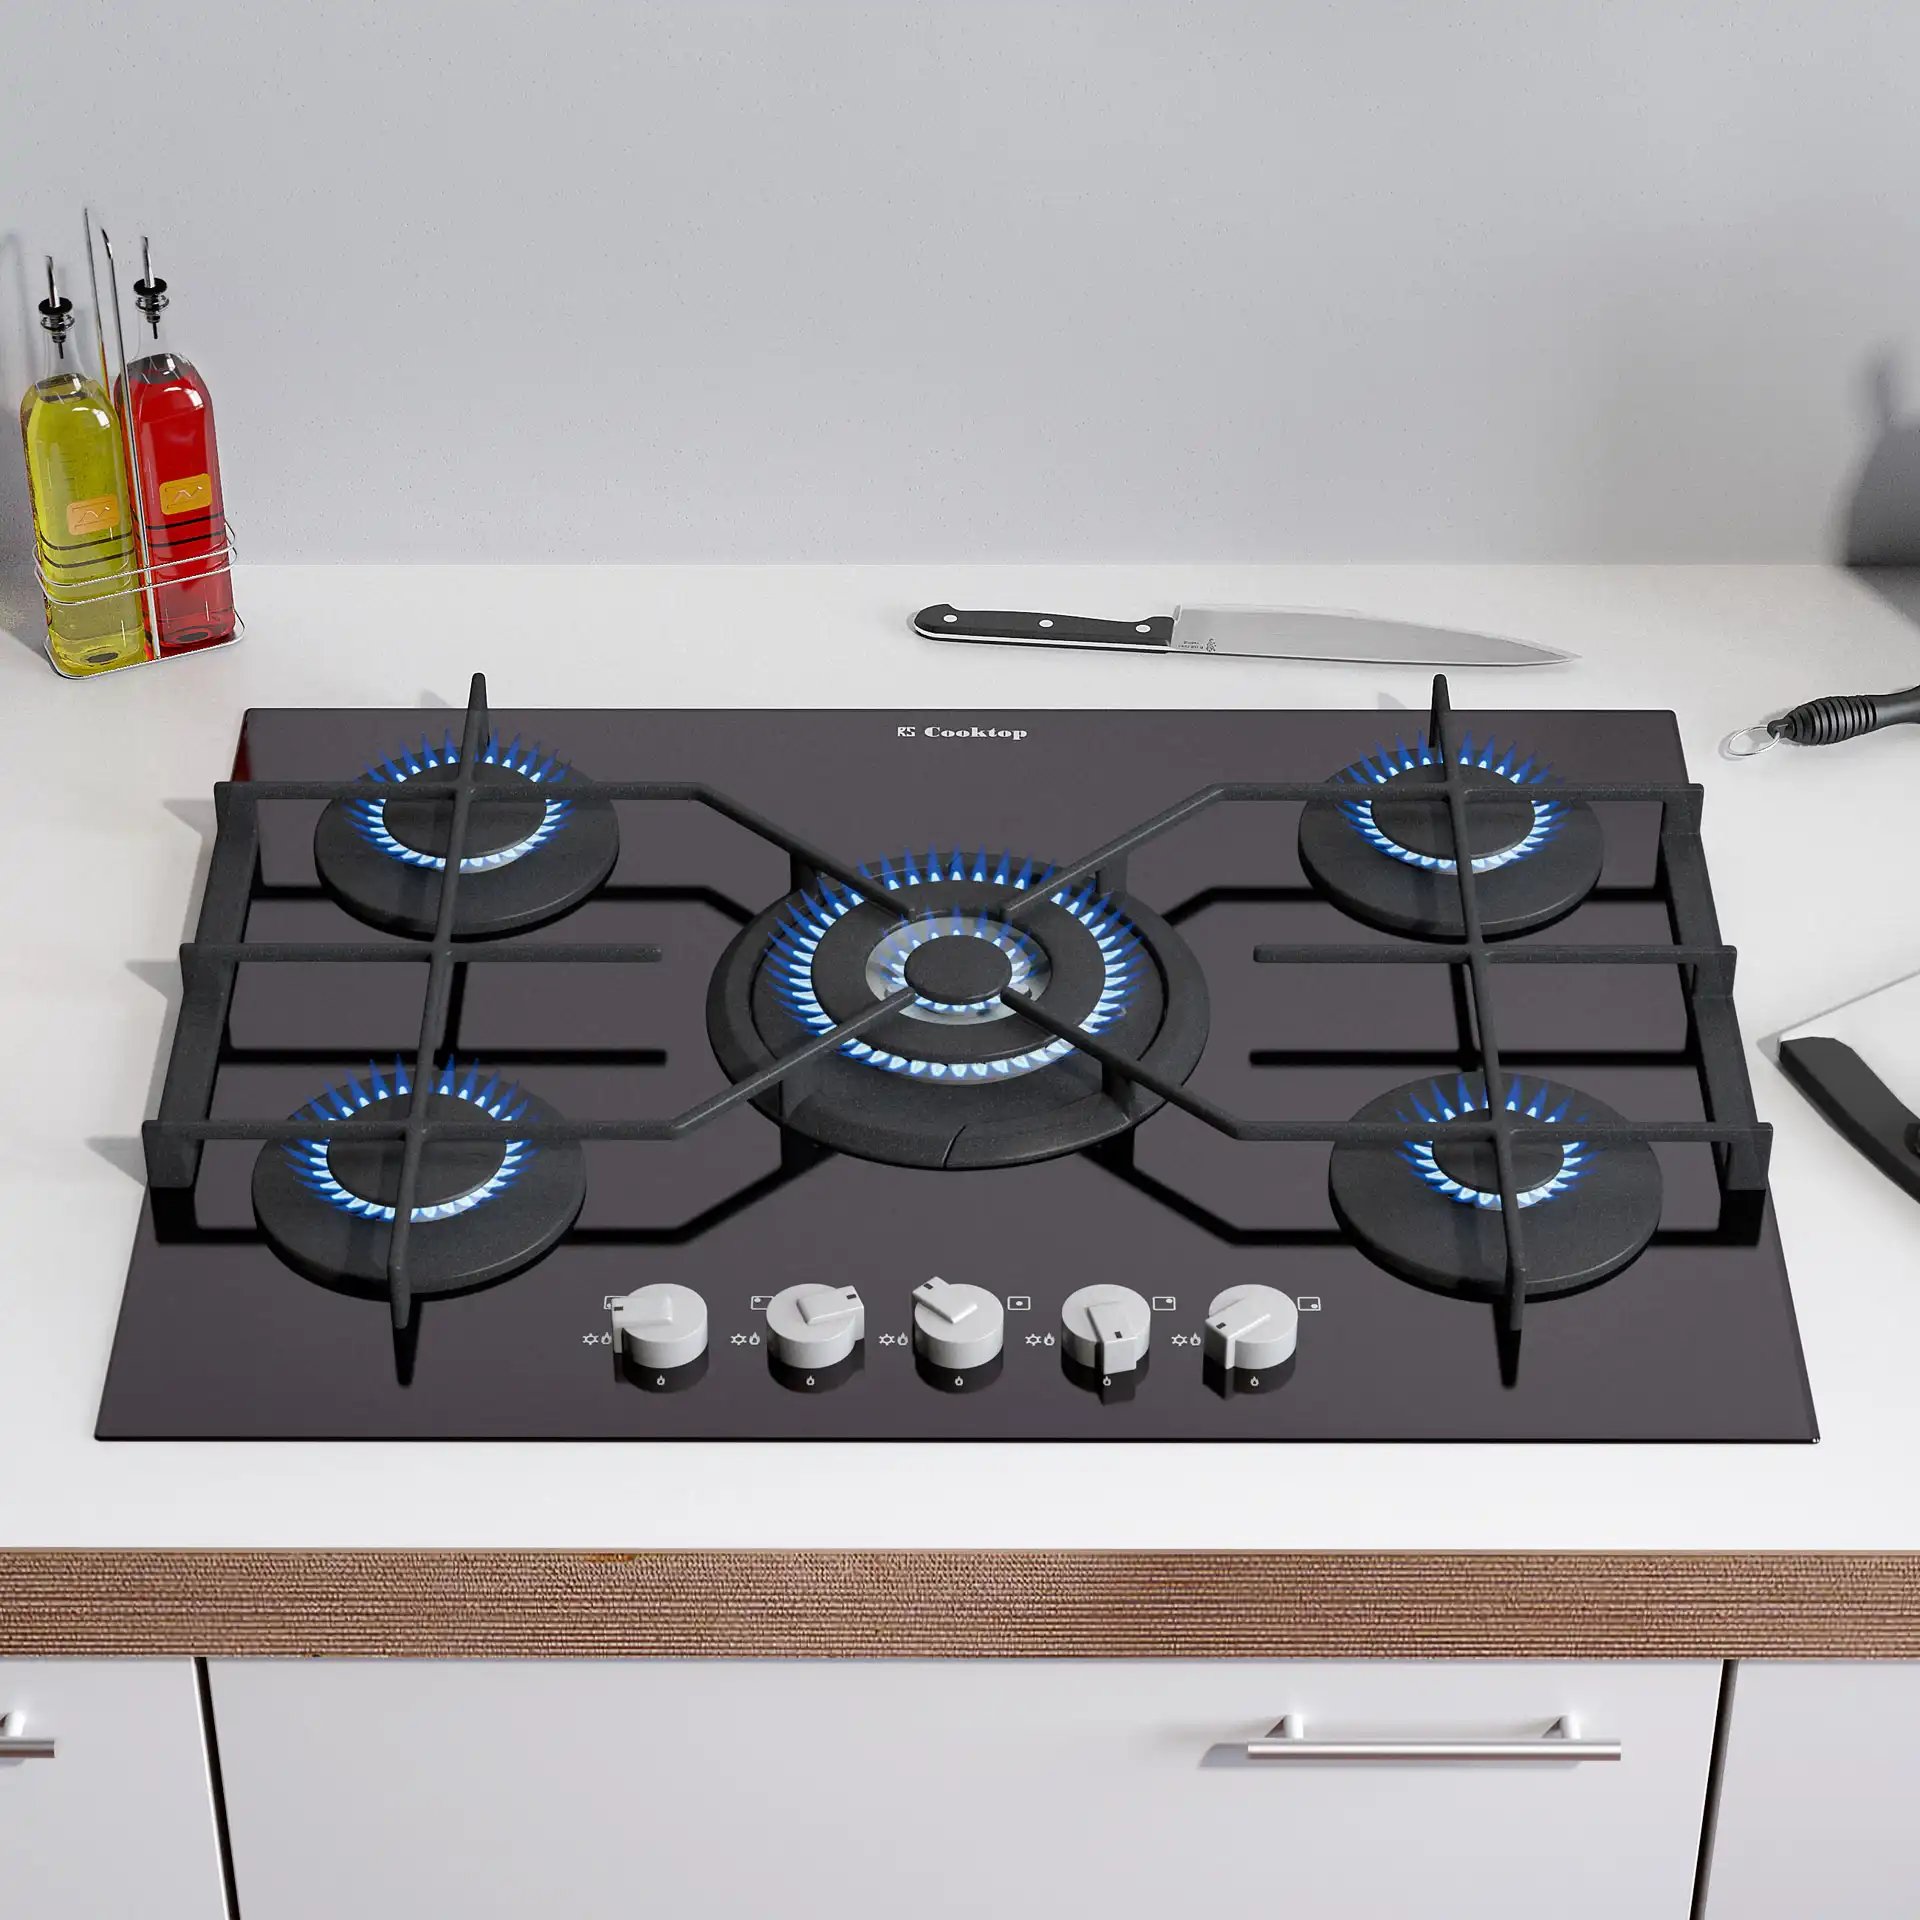 Photorealistic rendering of a 3d model of a black cooktop with a large gas burner in the interior.